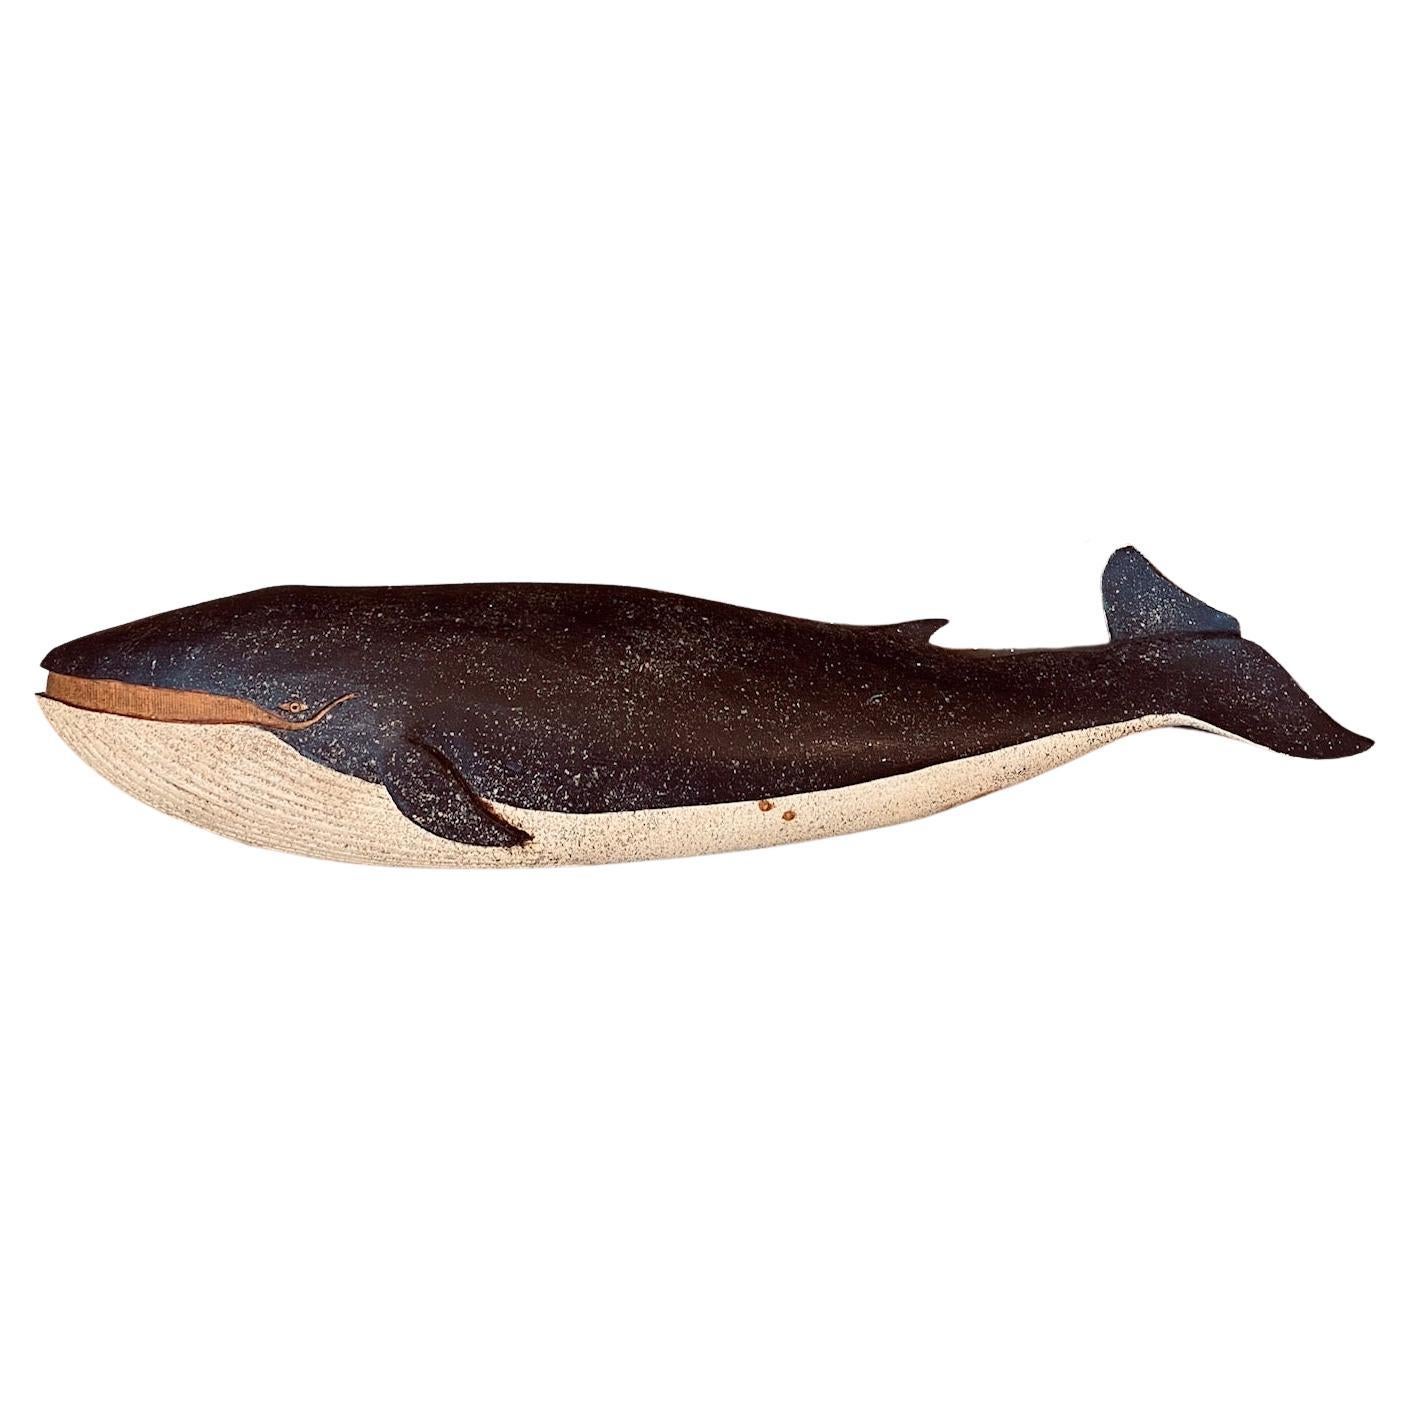 Carved and Decorated Finback Whale Plaque by Clark Voorhees, circa 1960